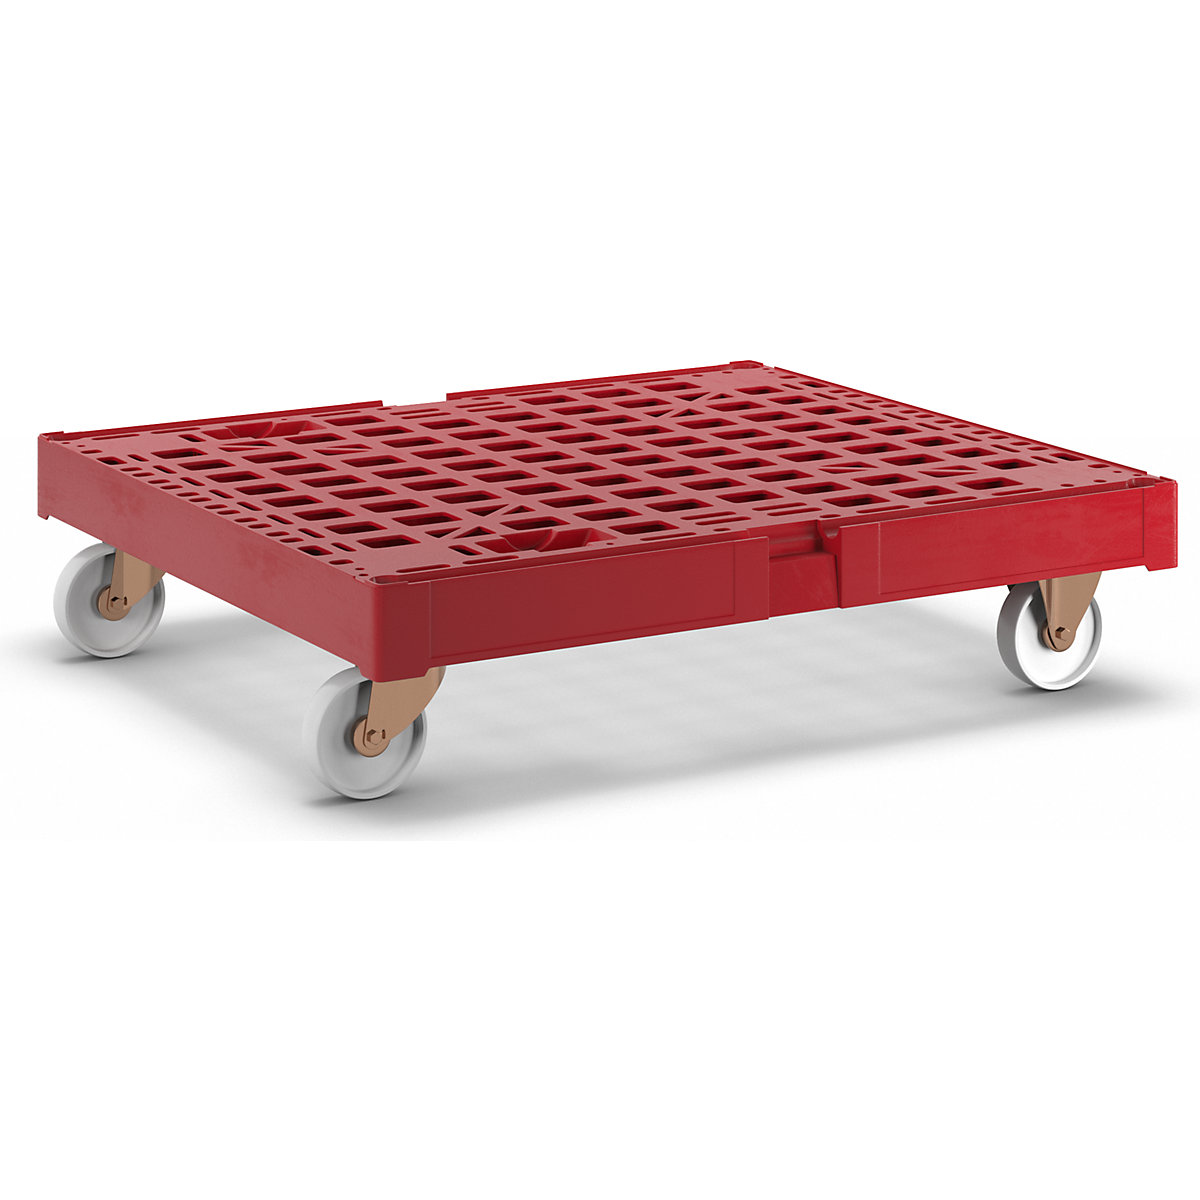 Transport dolly XL, max. load 500 kg, LxWxH 810 x 720 x 195 mm, flame red-11